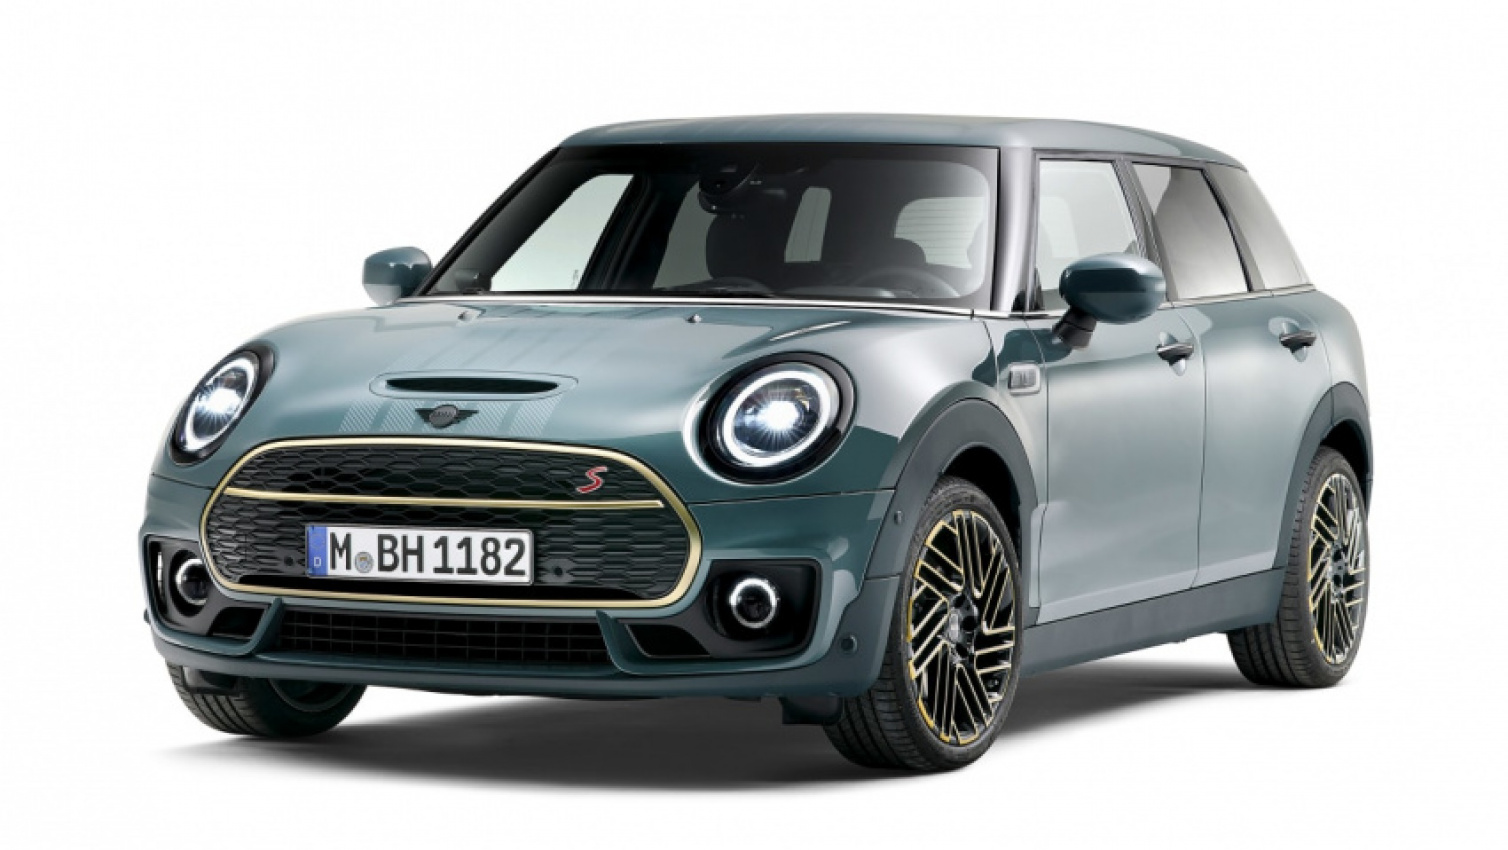 autos, cars, mini, reviews, electric cars, family hatchbacks, hatchback, hot hatches, small suvs, superminis, mini launches new special-edition trim levels for entire range